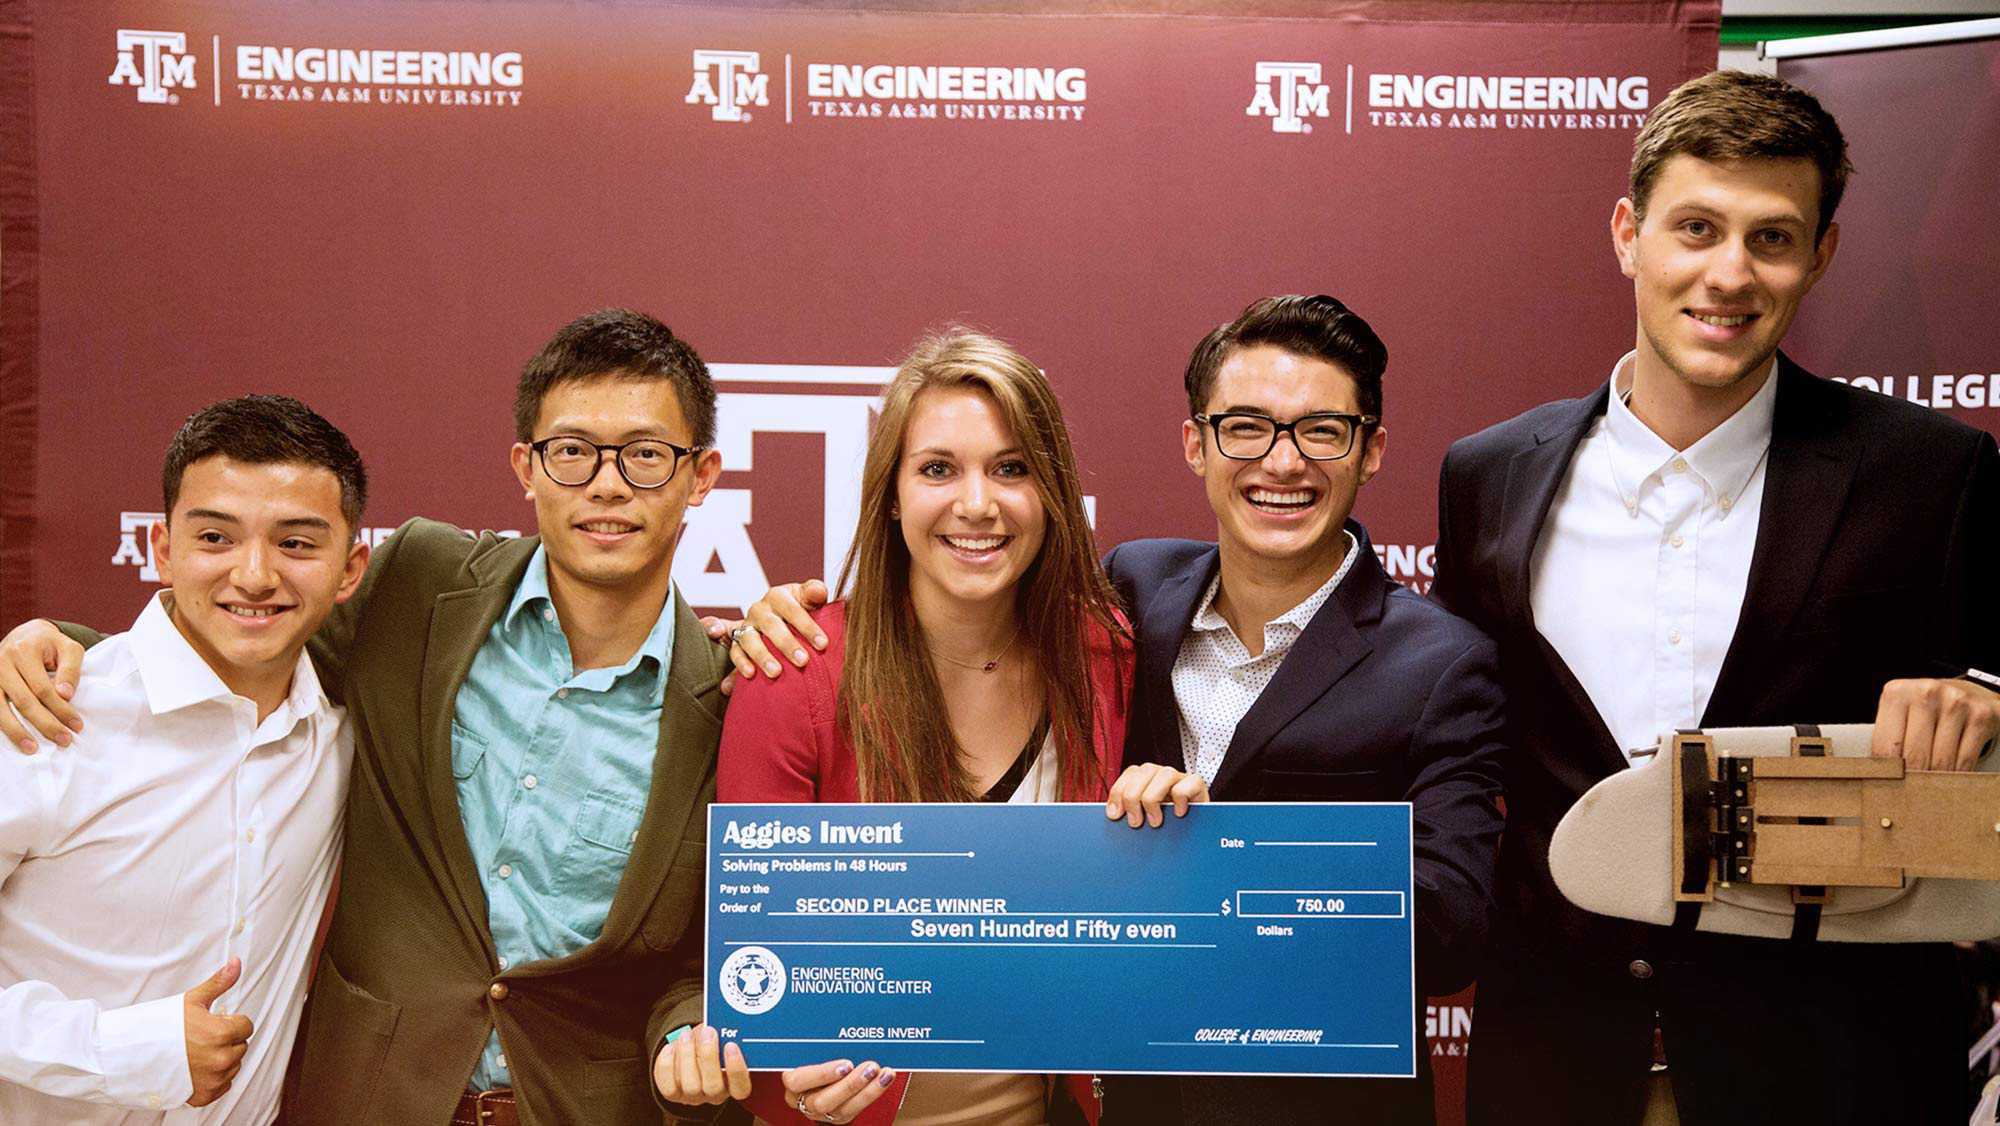 Texas A&amp;M University Engineering 5 student holding each others shoulders their project and a check Aggies Invent Solving Problems in 48 hours pay to the order of Second Place Winner Seven Hundred and Fifty Even Dollars Engineering Innovation Center.